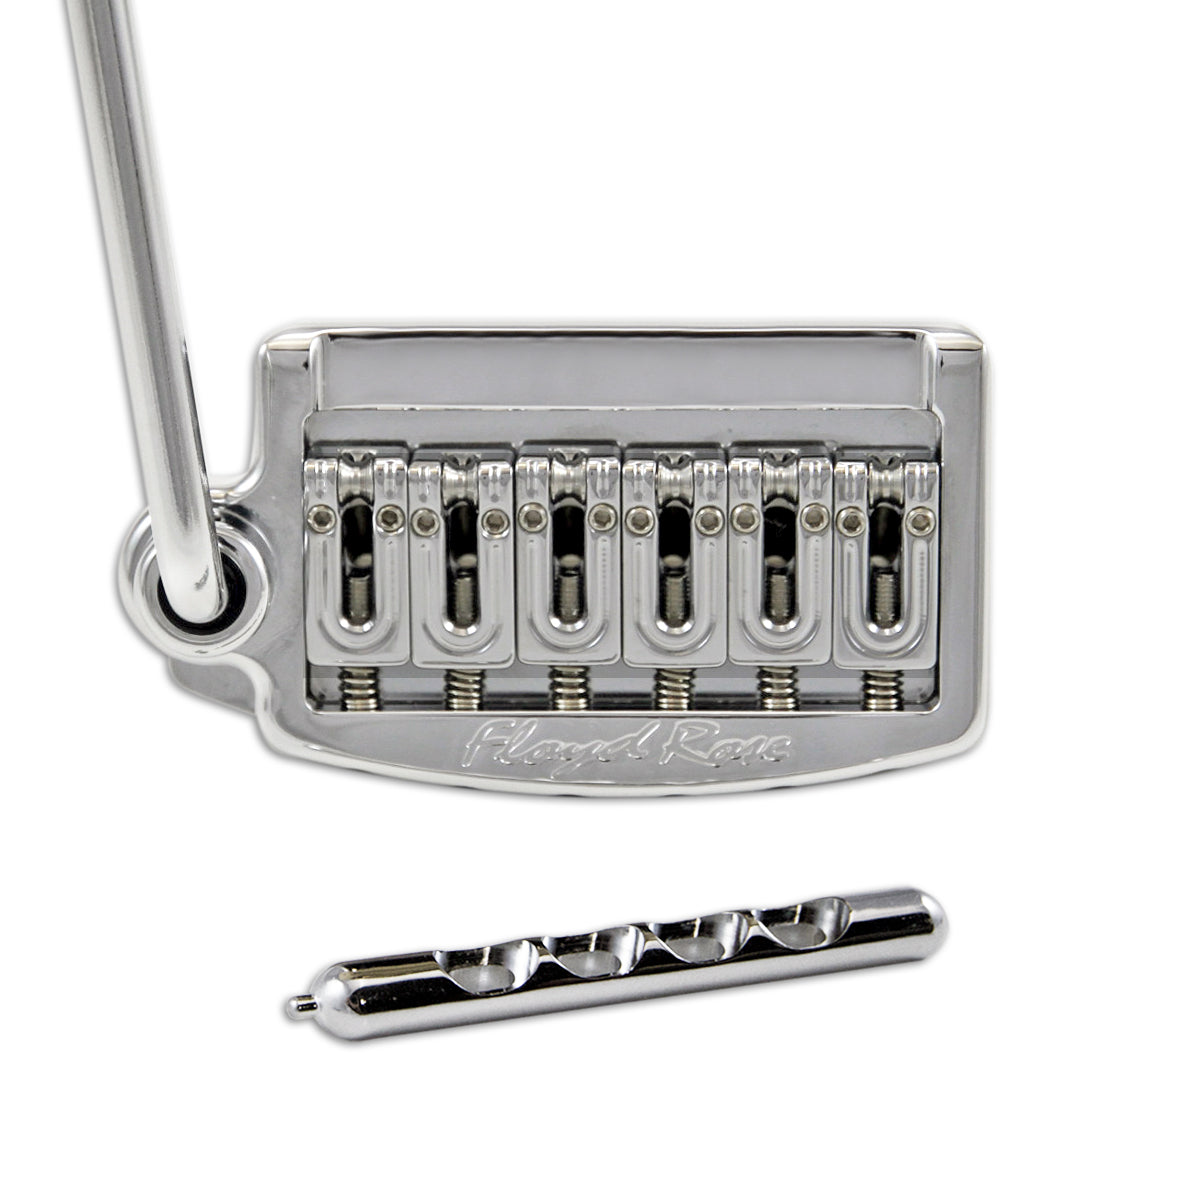 FR Left-Handed Rail Tail Tremolo - Wide